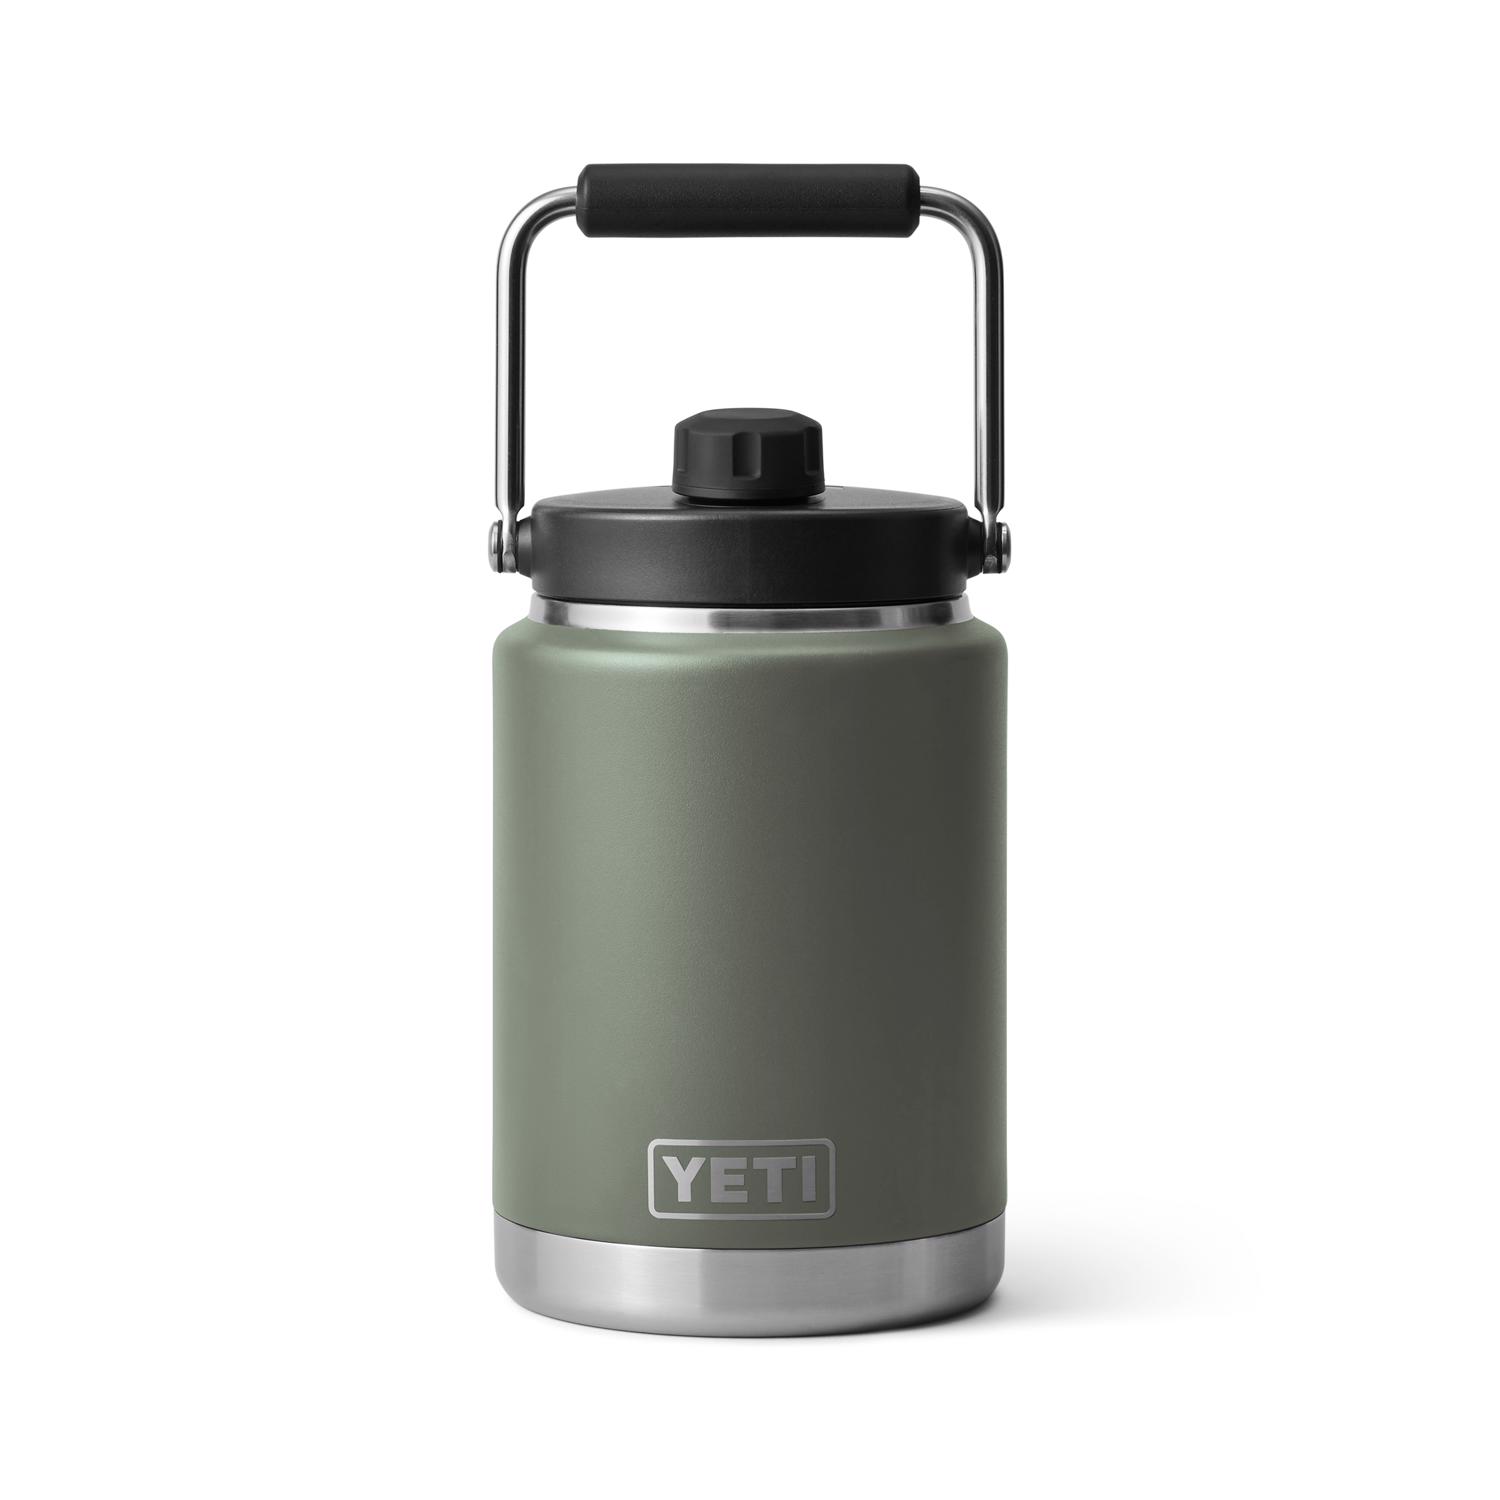 Photos - Other Accessories Yeti Rambler 0.5 gal Camp Green BPA Free Insulated Jug 21071501704 